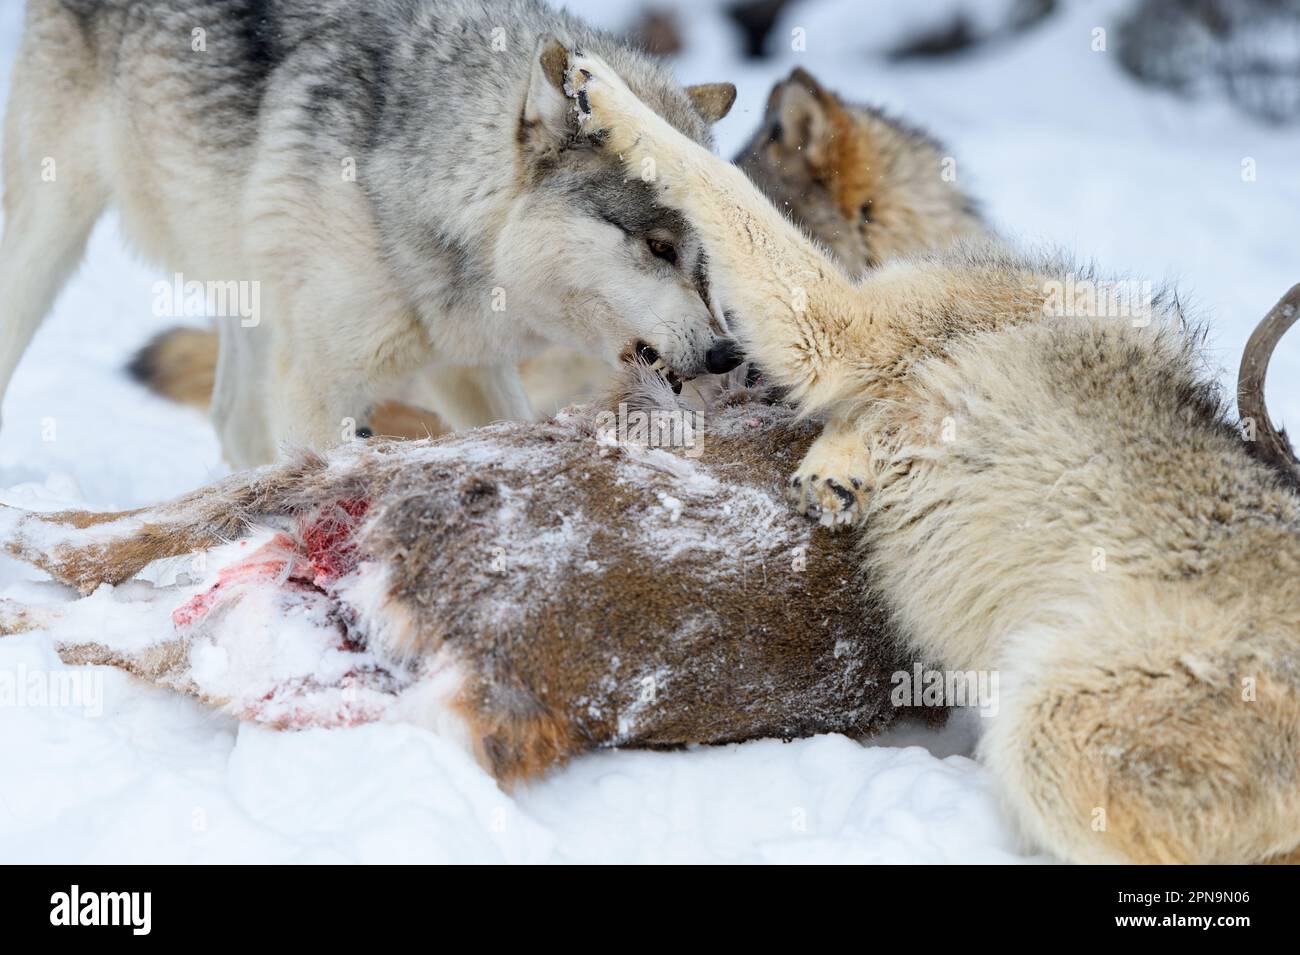 Wolf (Canis lupus) Paws at Face of Second Over Body of Deer Winter - captive animals Stock Photo